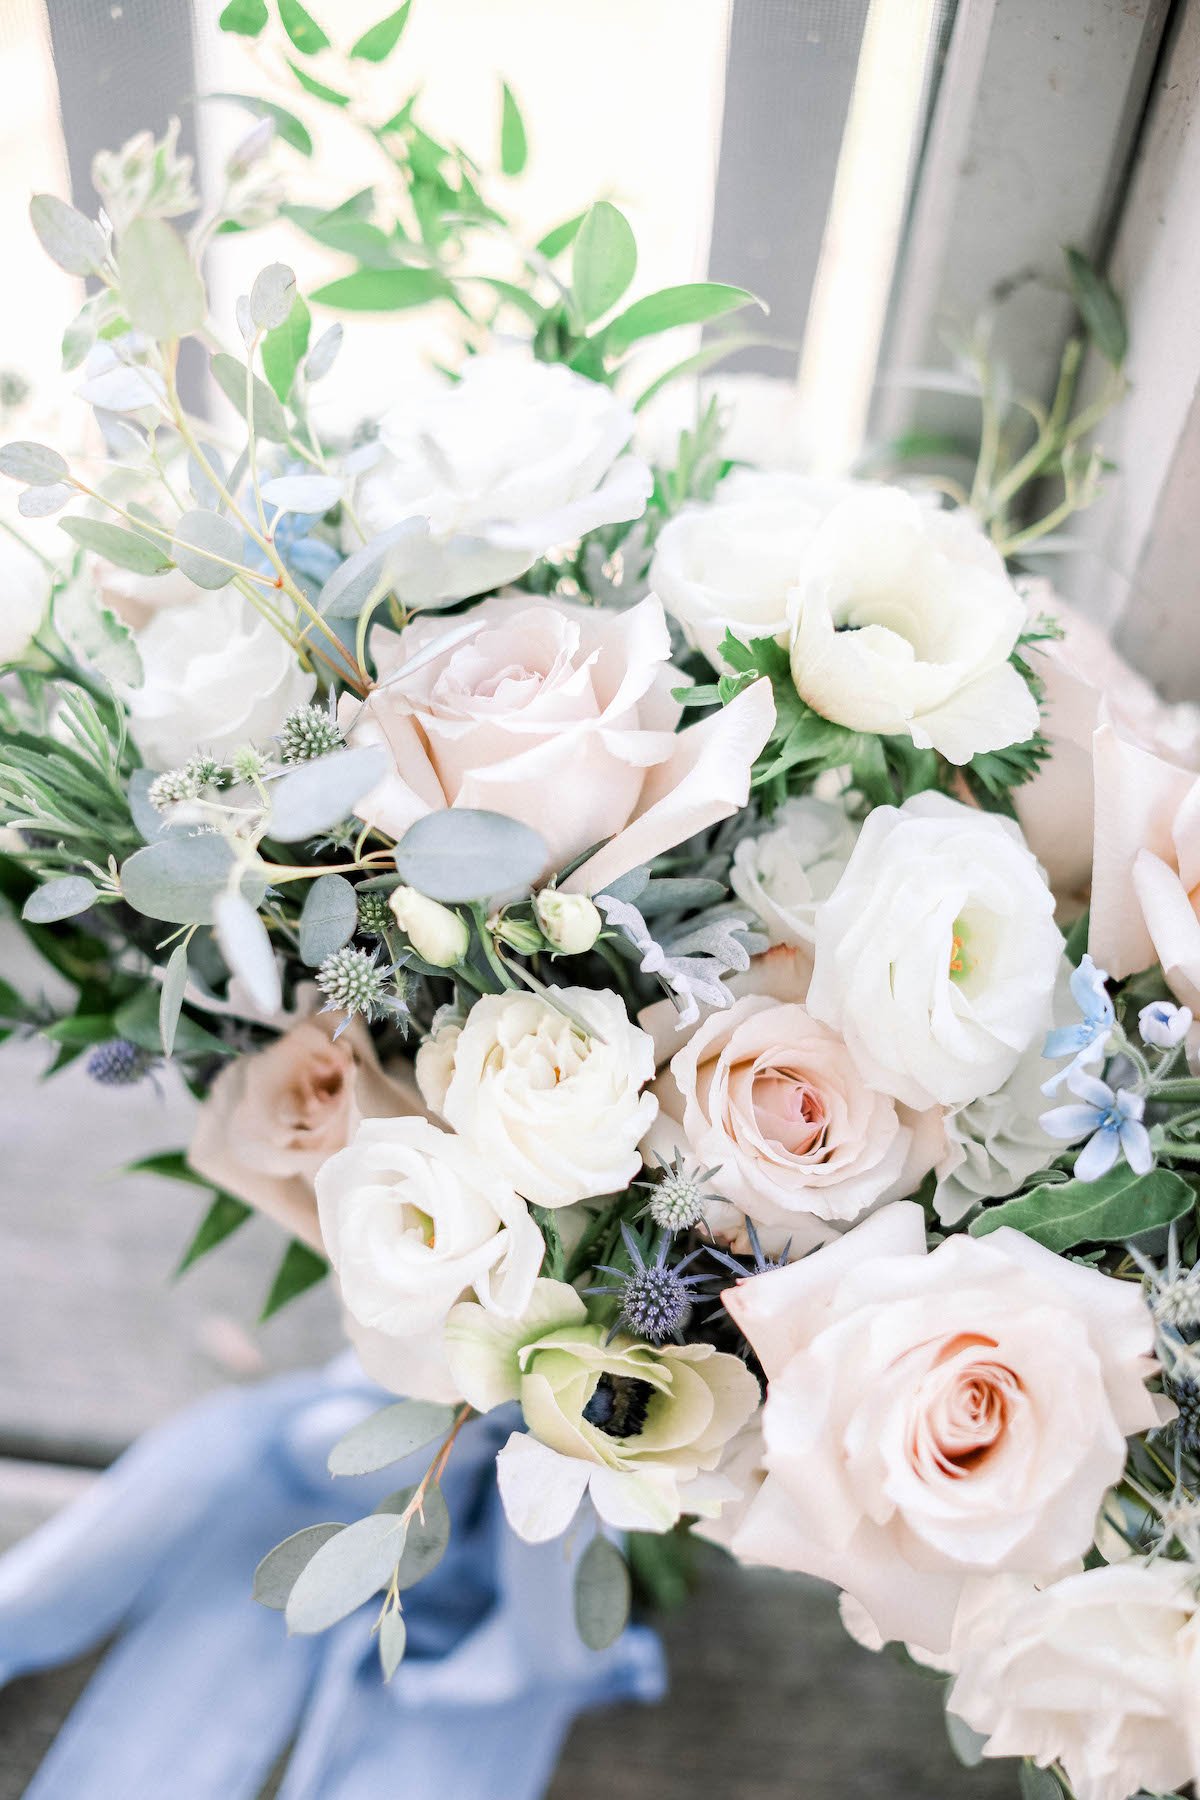 Light and airy bridal bouquet with blush and pale blue 